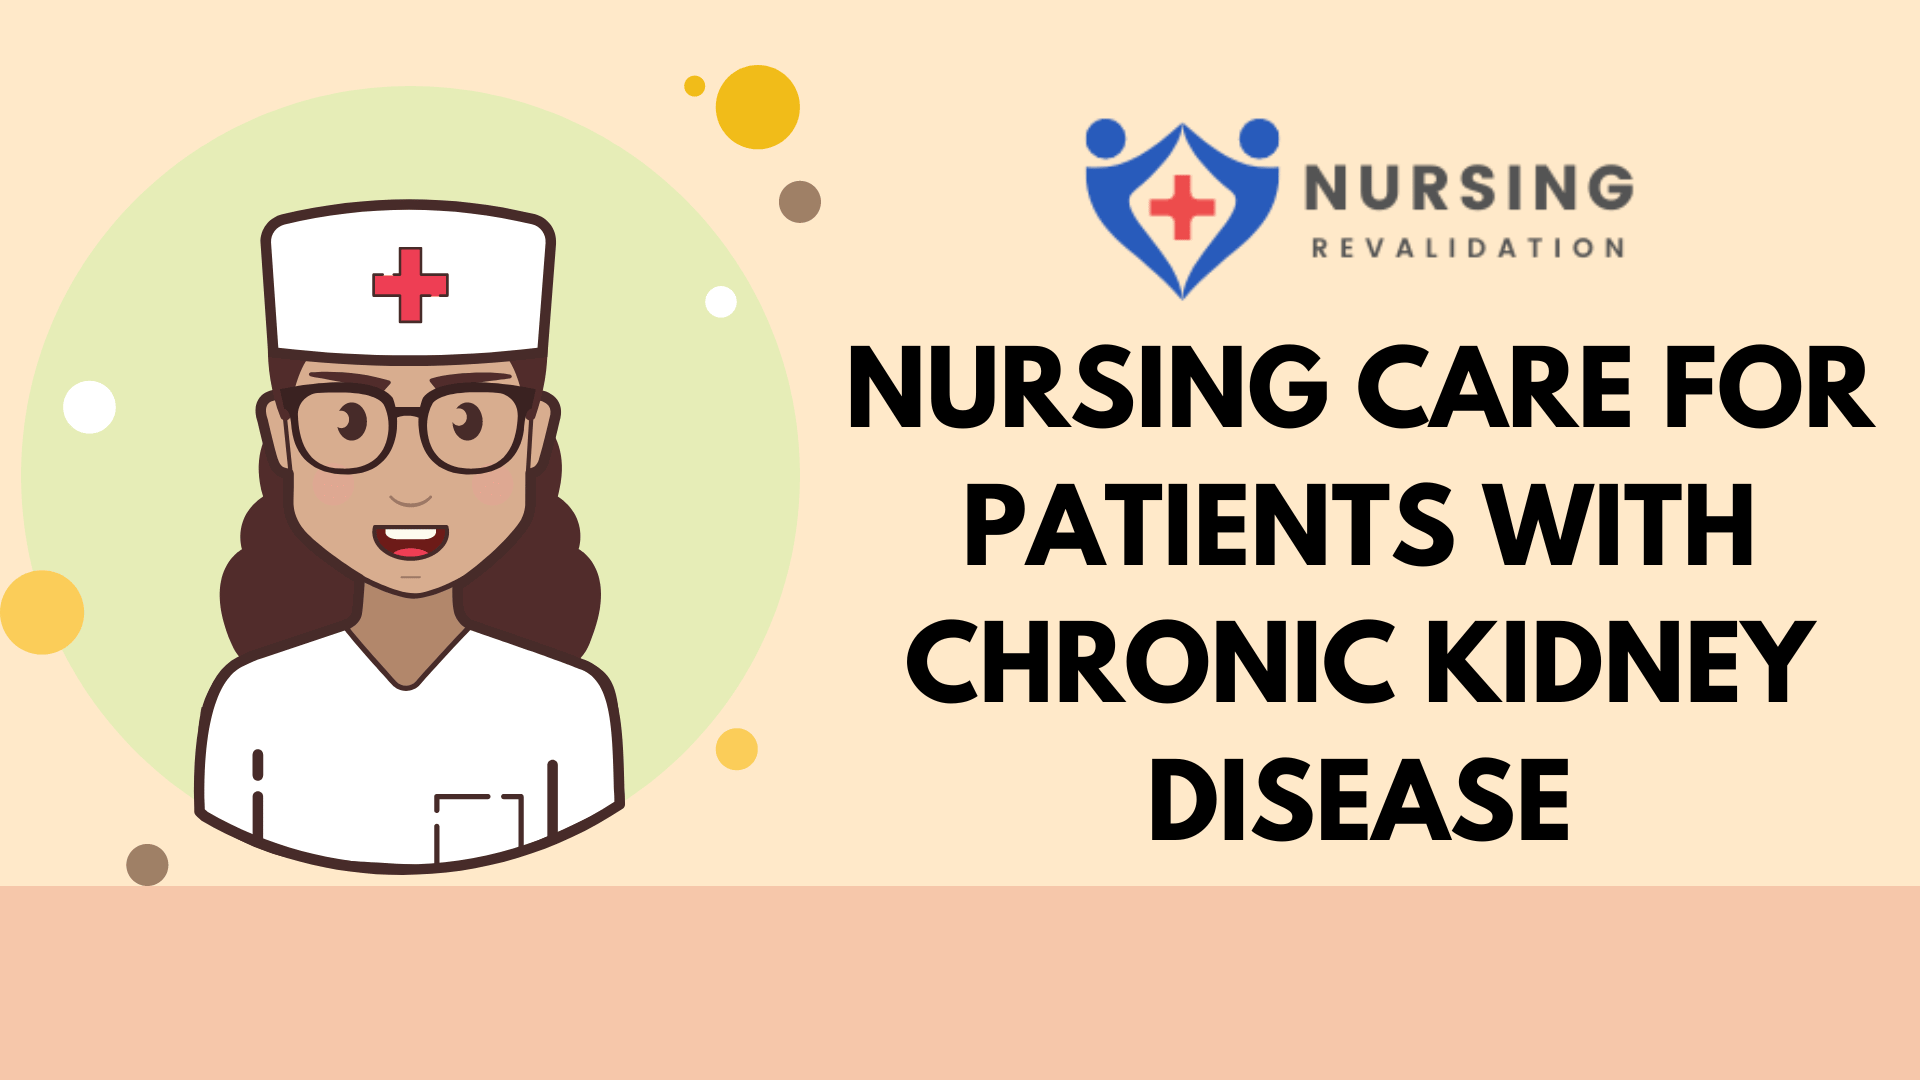 Nursing Care for Patients with Chronic Kidney Disease